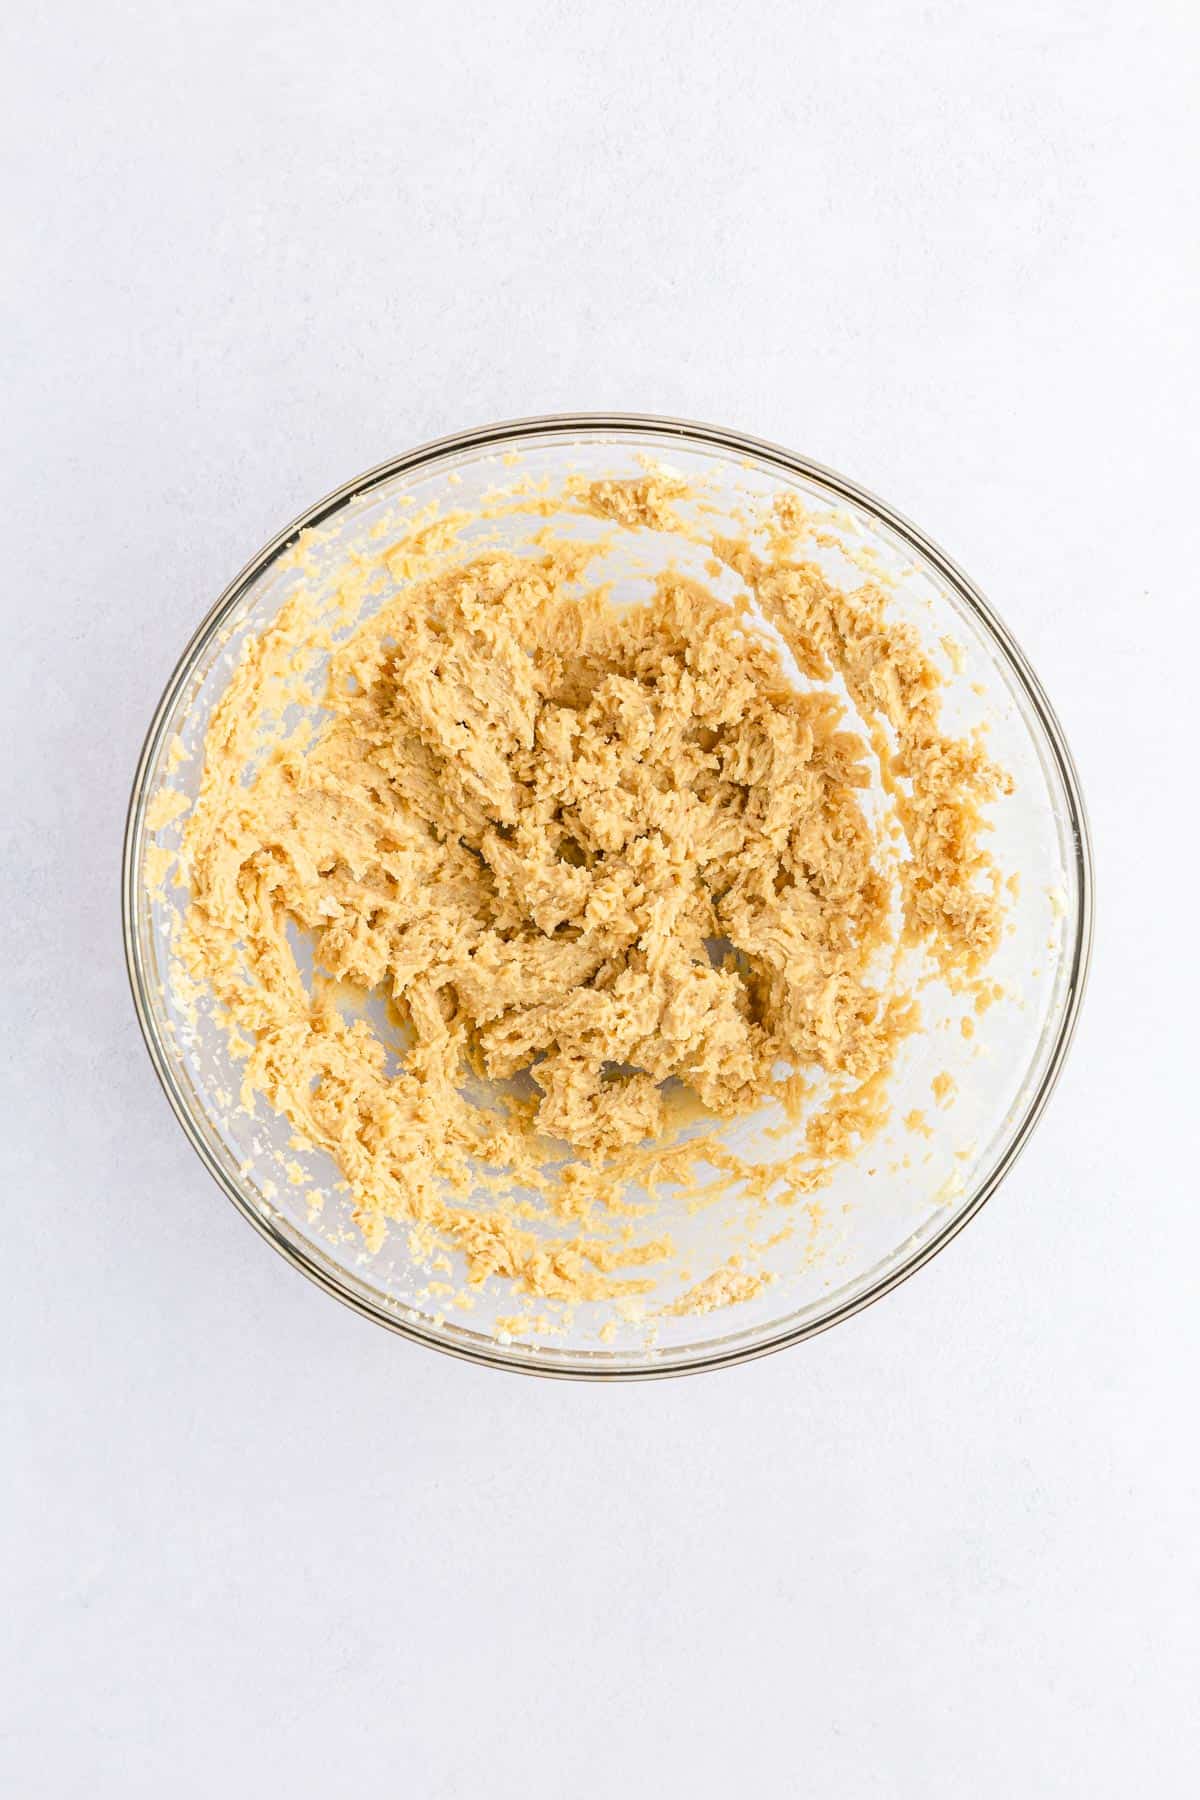 Butter and two types of sugar creamed together in a glass mixing bowl.